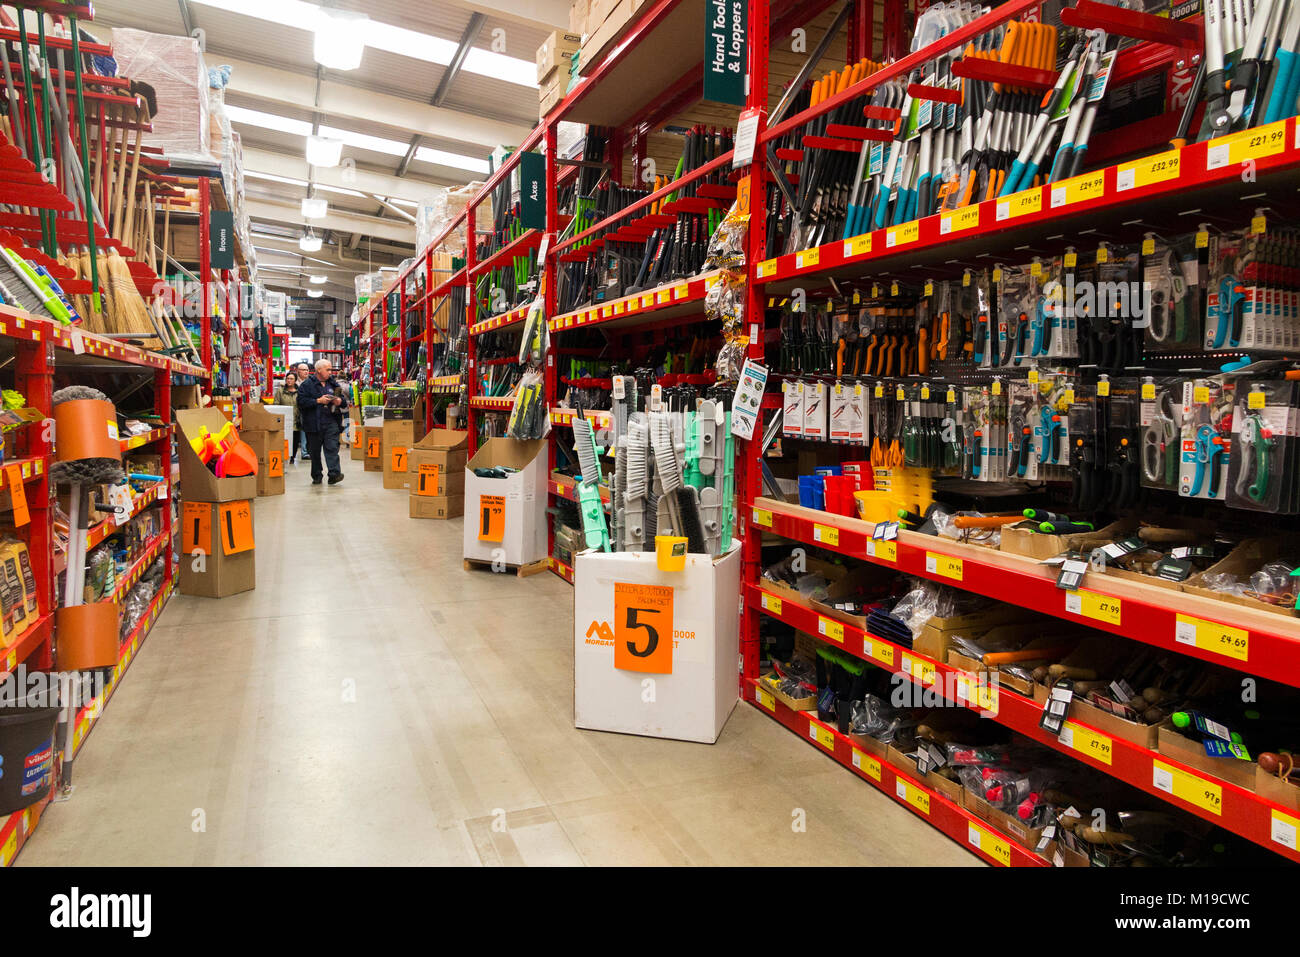 Australian Store High Resolution Stock Photography and - Alamy